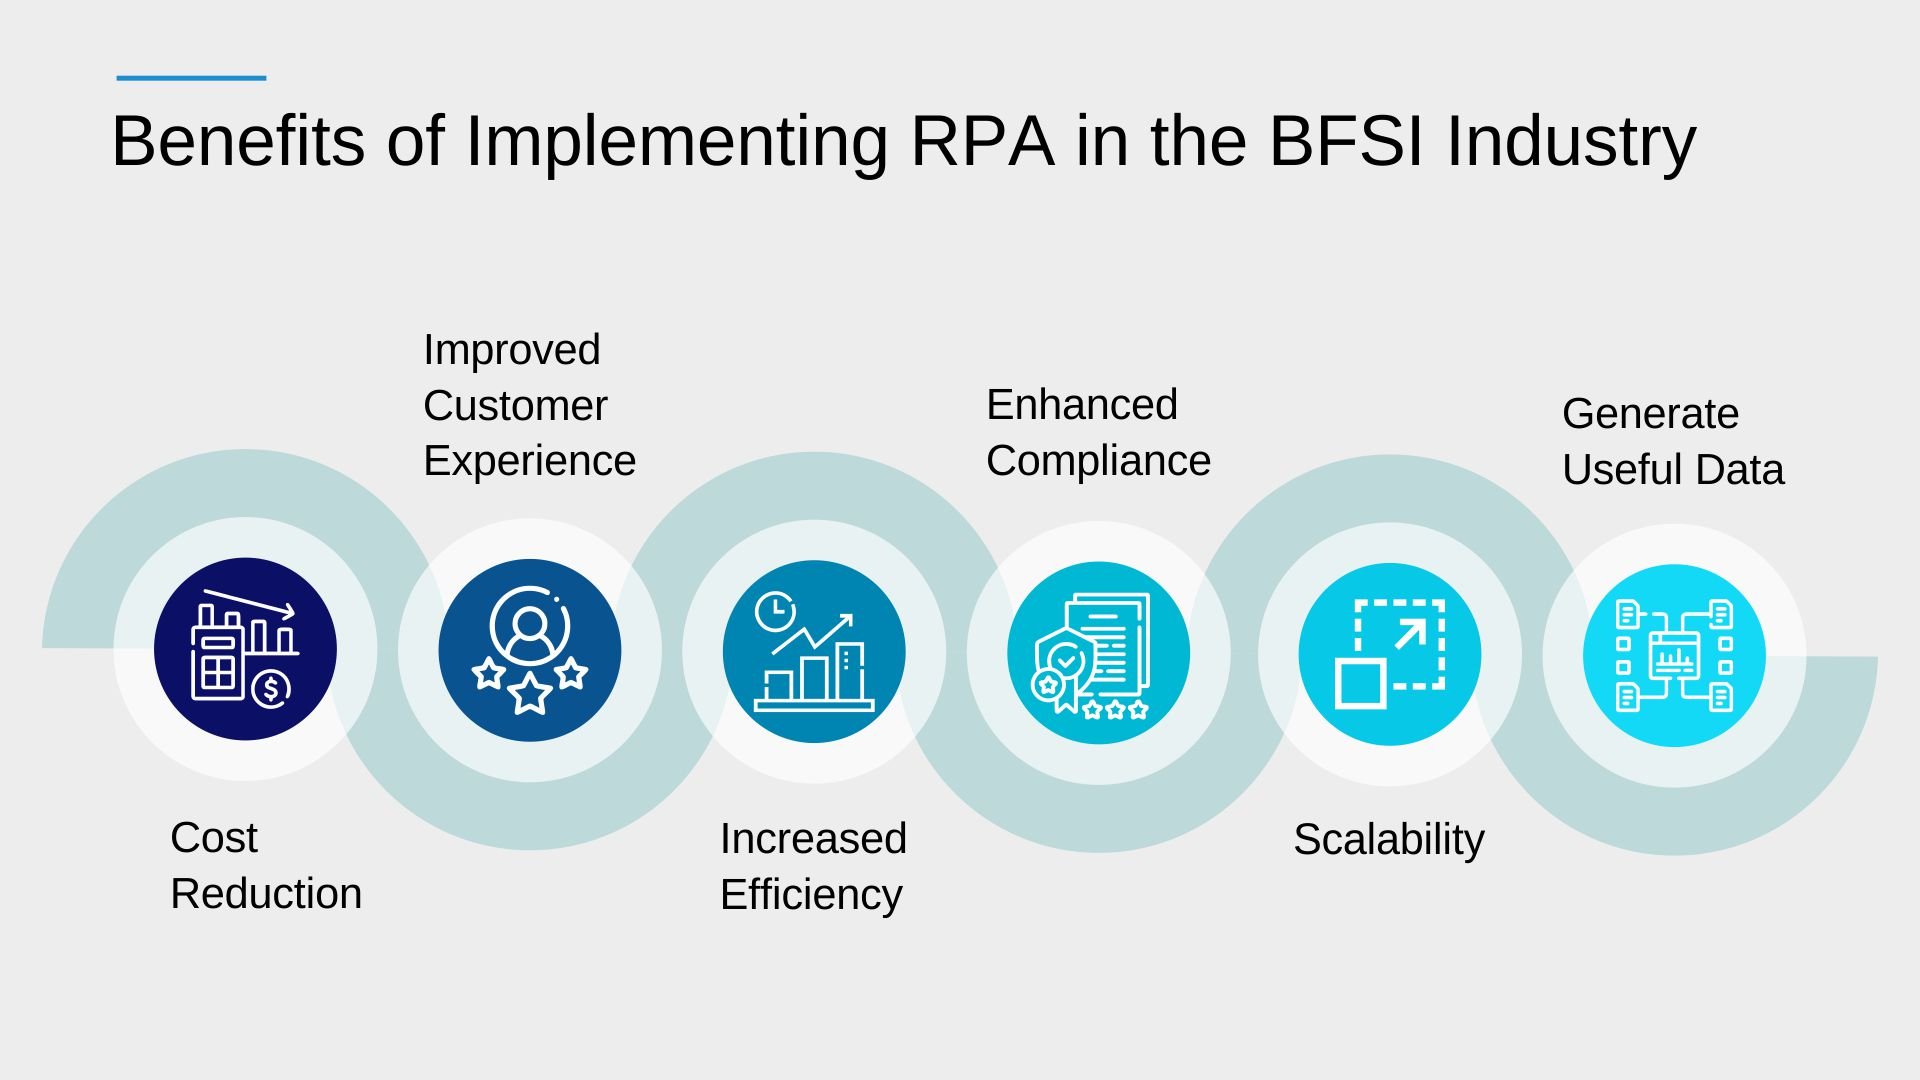 Benefits of Implementing RPA in the BFSI Industry-Inside image